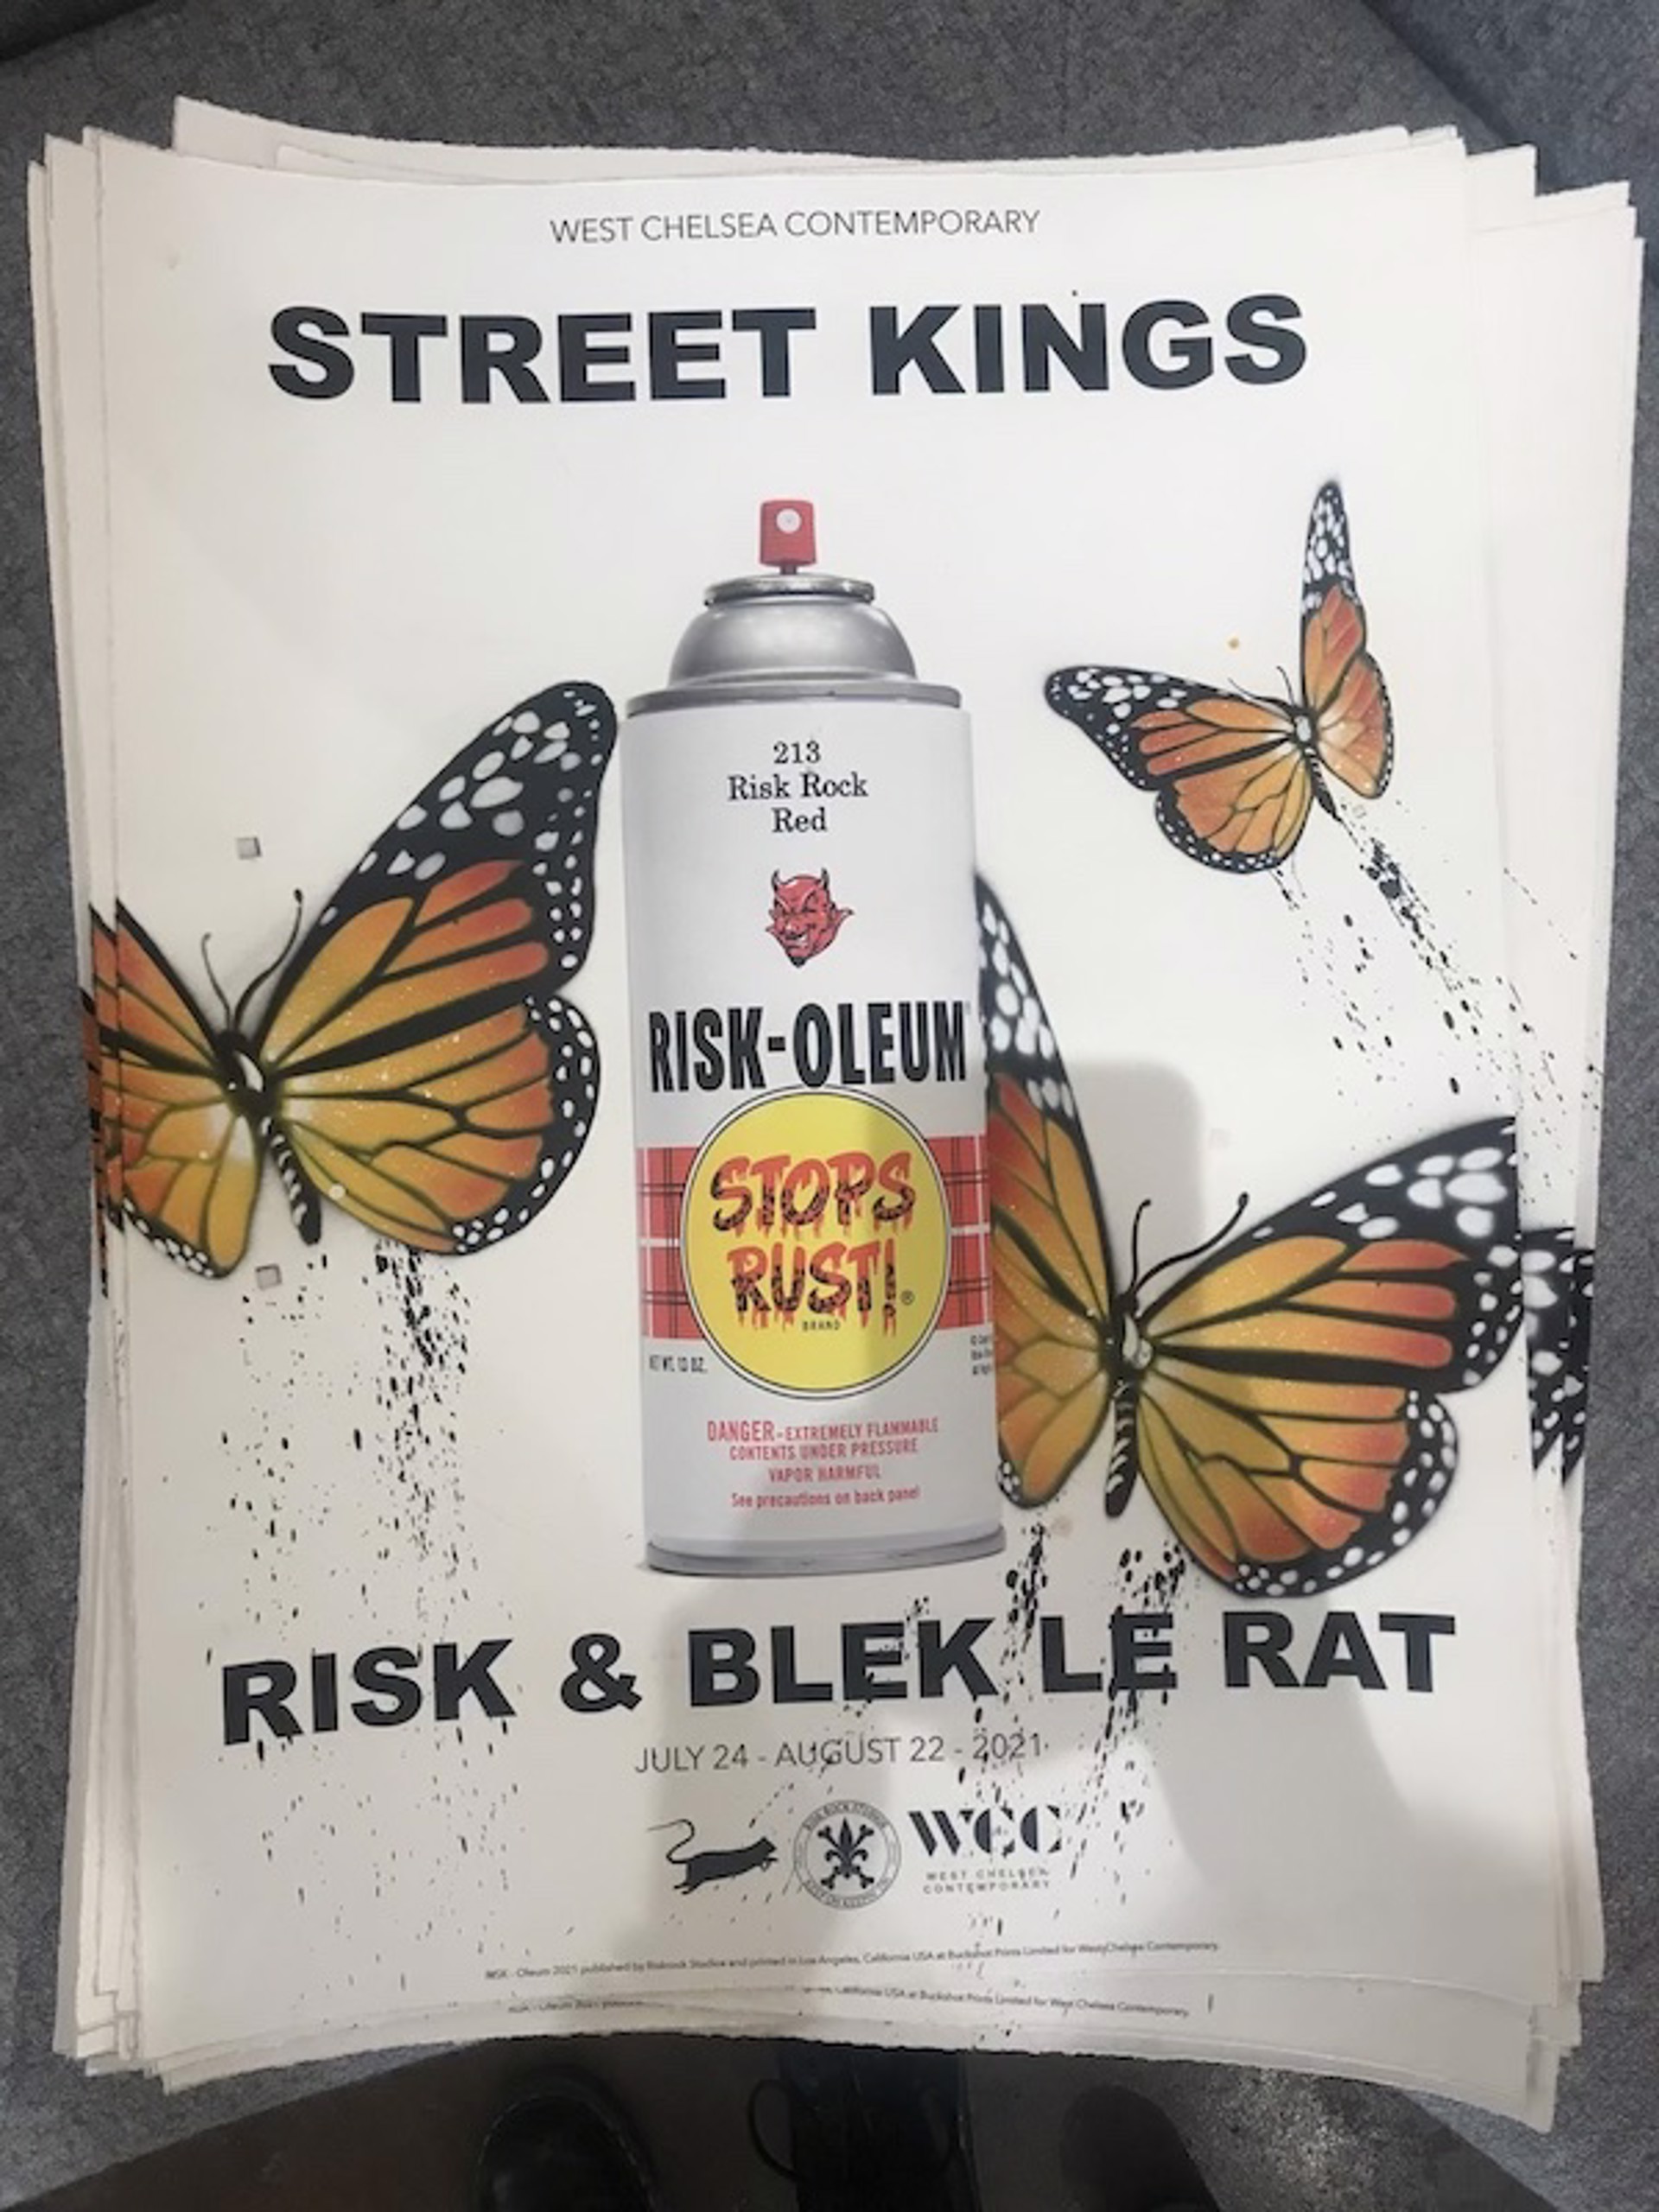 Street Kings Show Print (36/50) by Risk